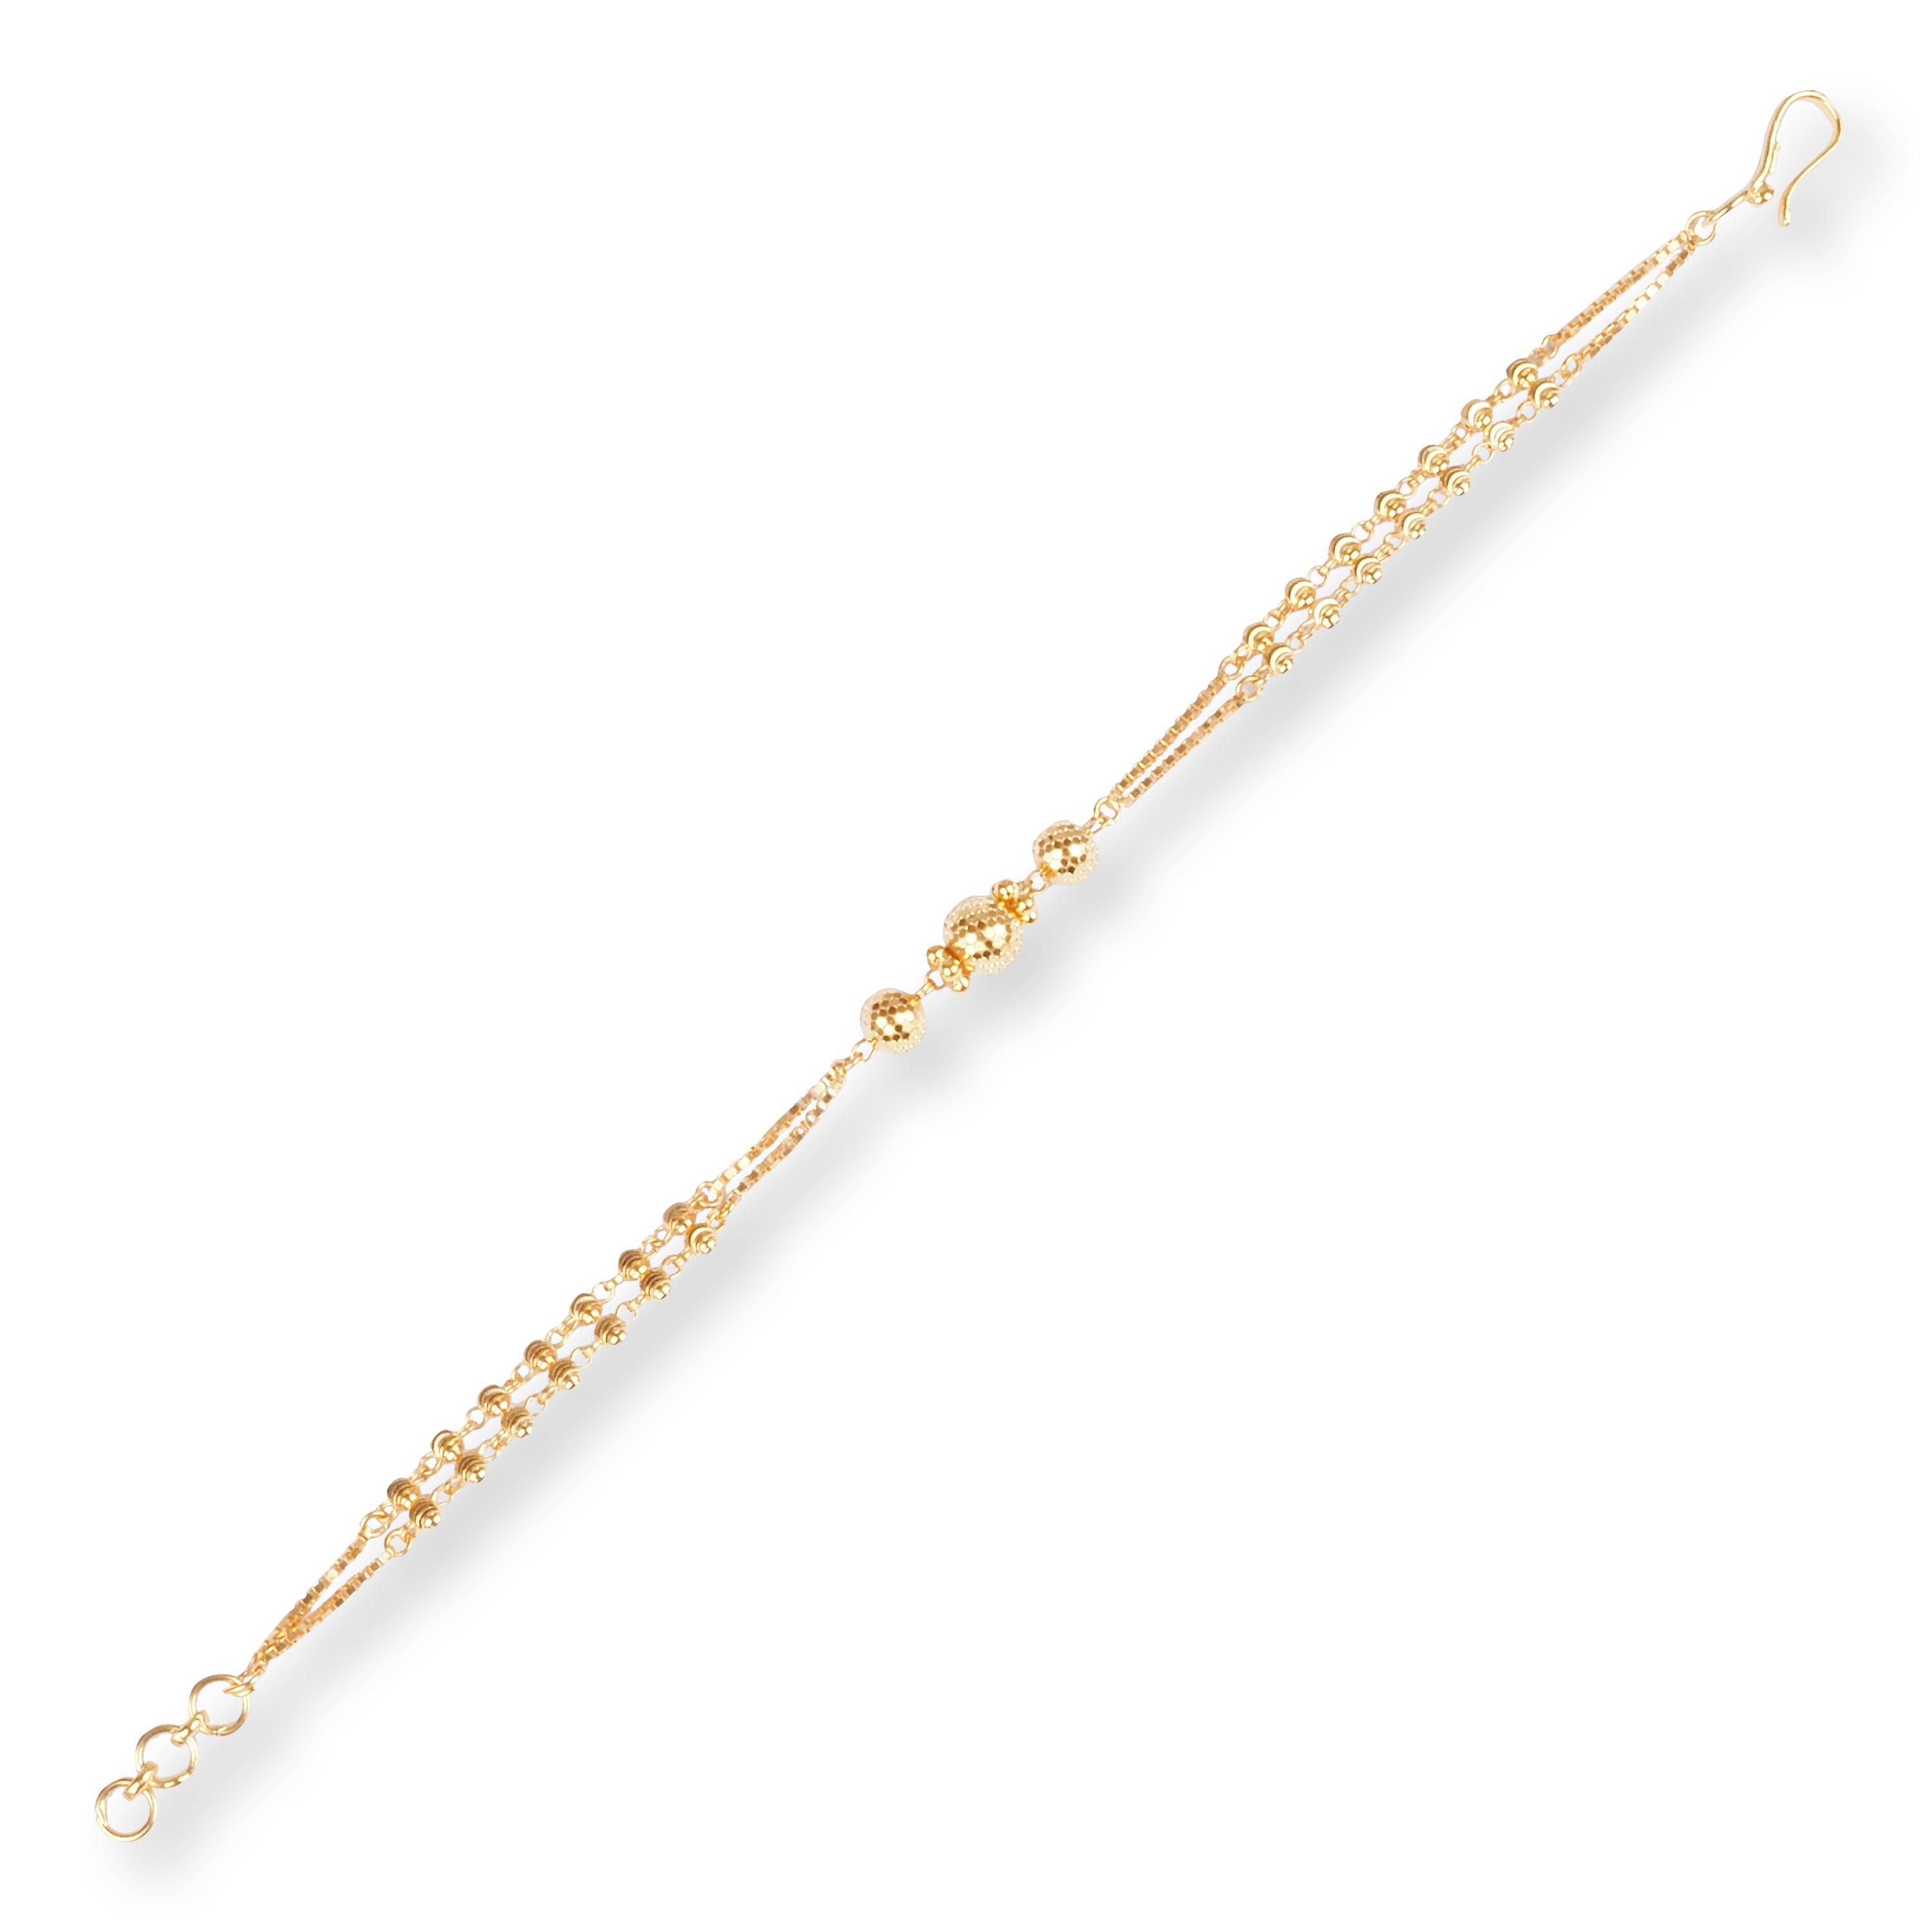 22ct Gold Bracelet with Diamond Cut Beads, Double Chain and Hook Clasp LBR-8500 - Minar Jewellers